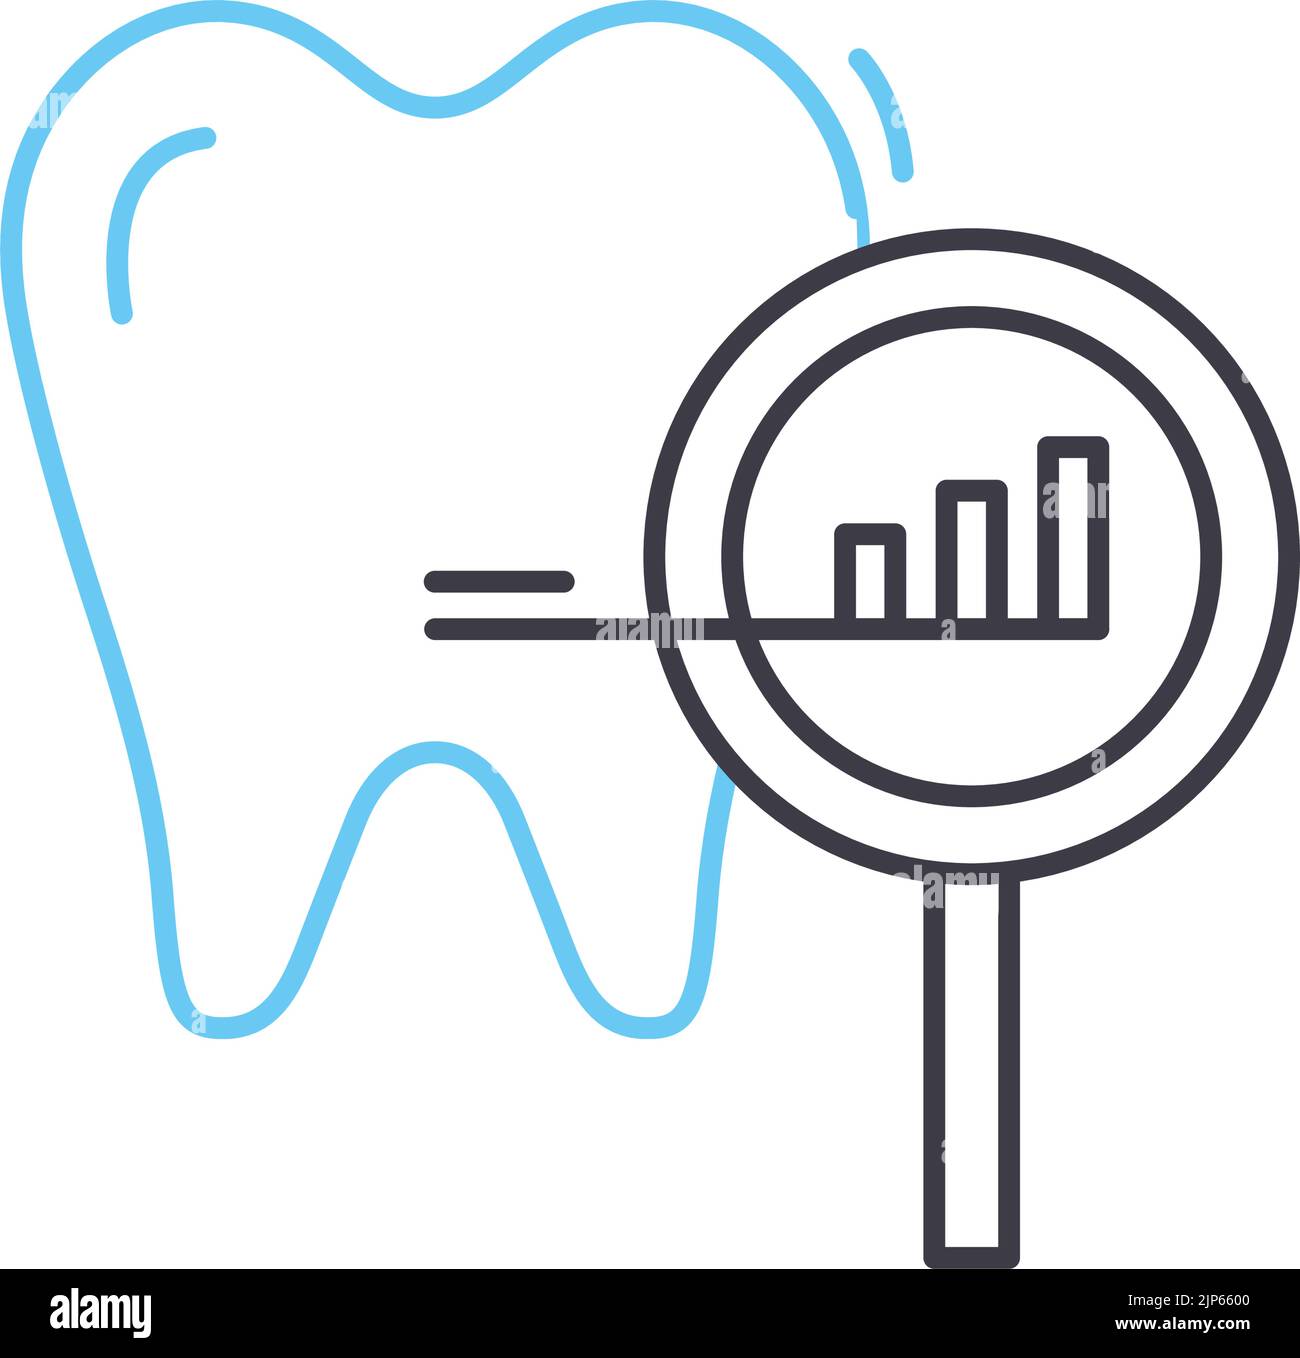 decayed tooth line icon, outline symbol, vector illustration, concept sign Stock Vector